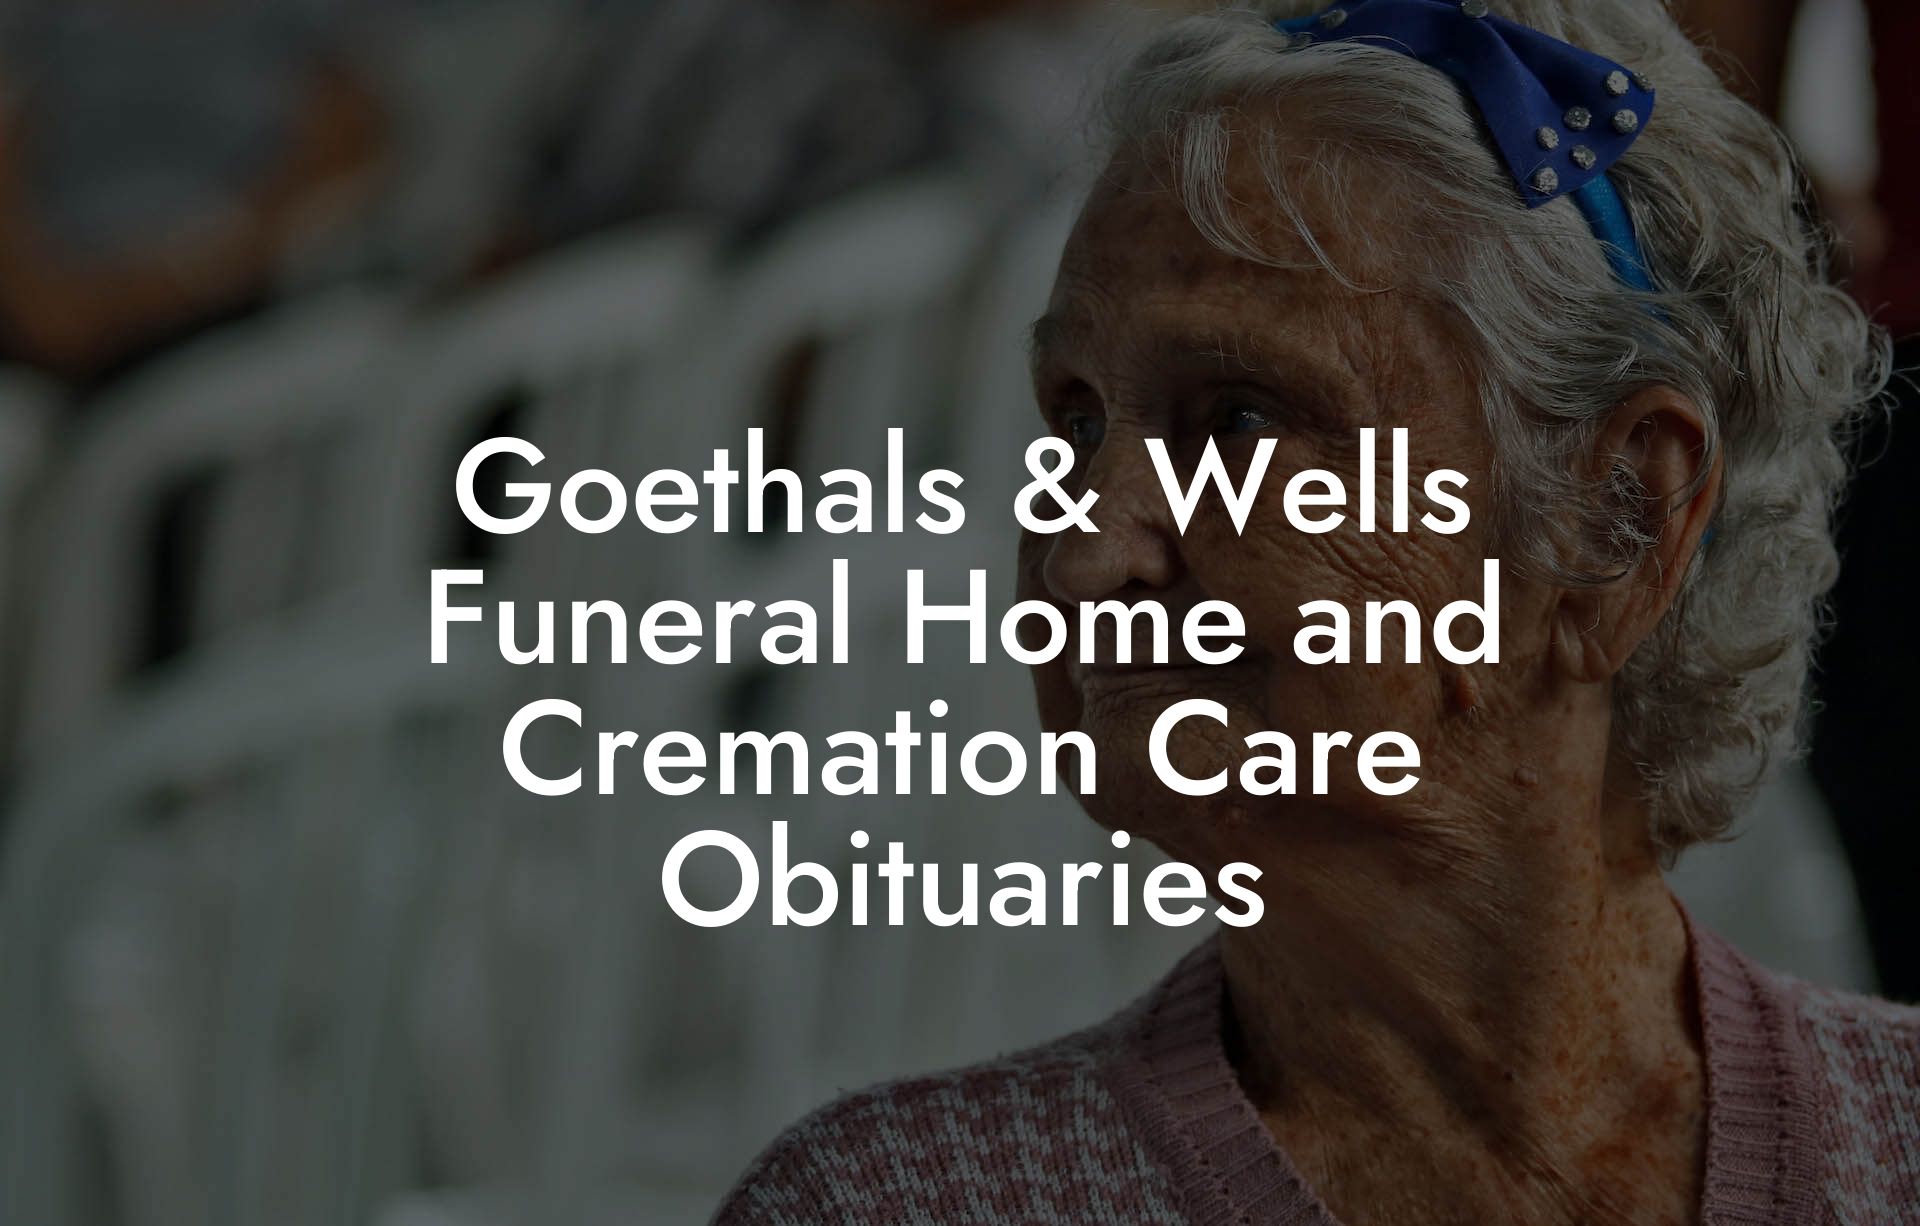 Goethals & Wells Funeral Home and Cremation Care Obituaries